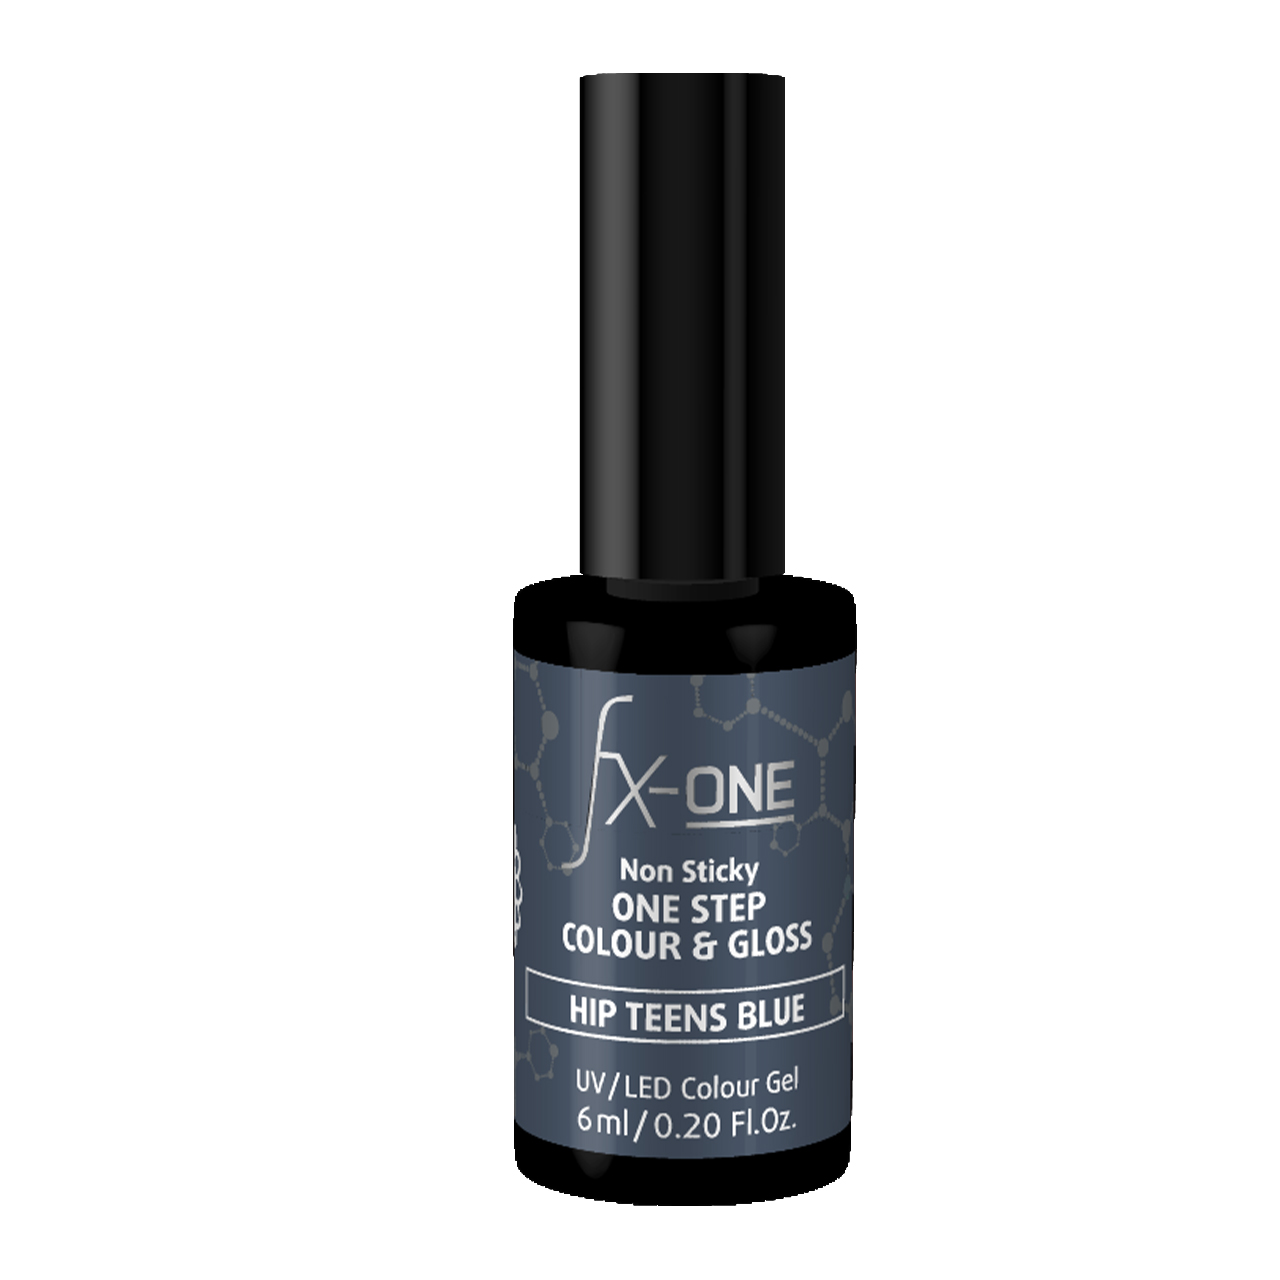 FX-ONE Colour 6ml Blueberry | Gloss & Muffin Blueberry Muffin 02-939 